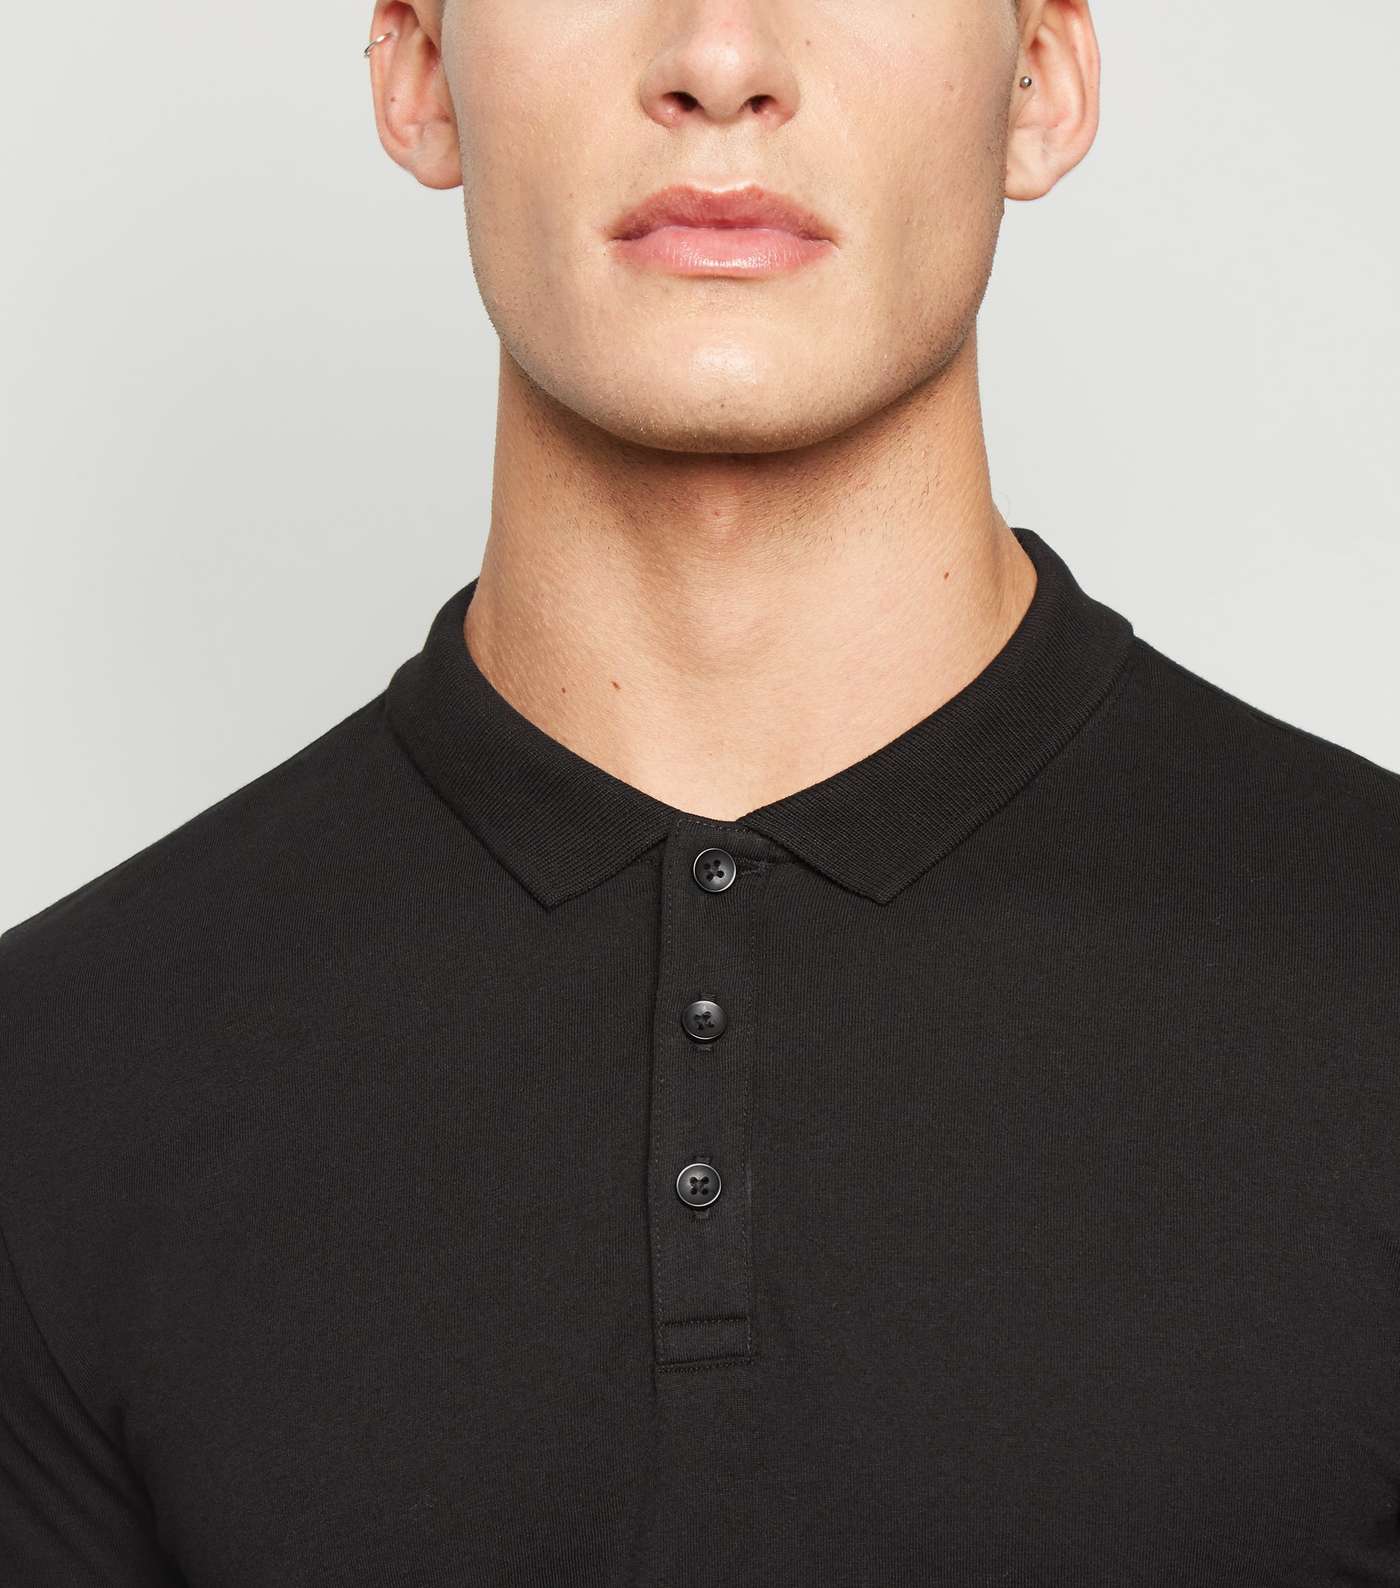 Black Long Sleeve Muscle Fit Polo Shirt Image 5